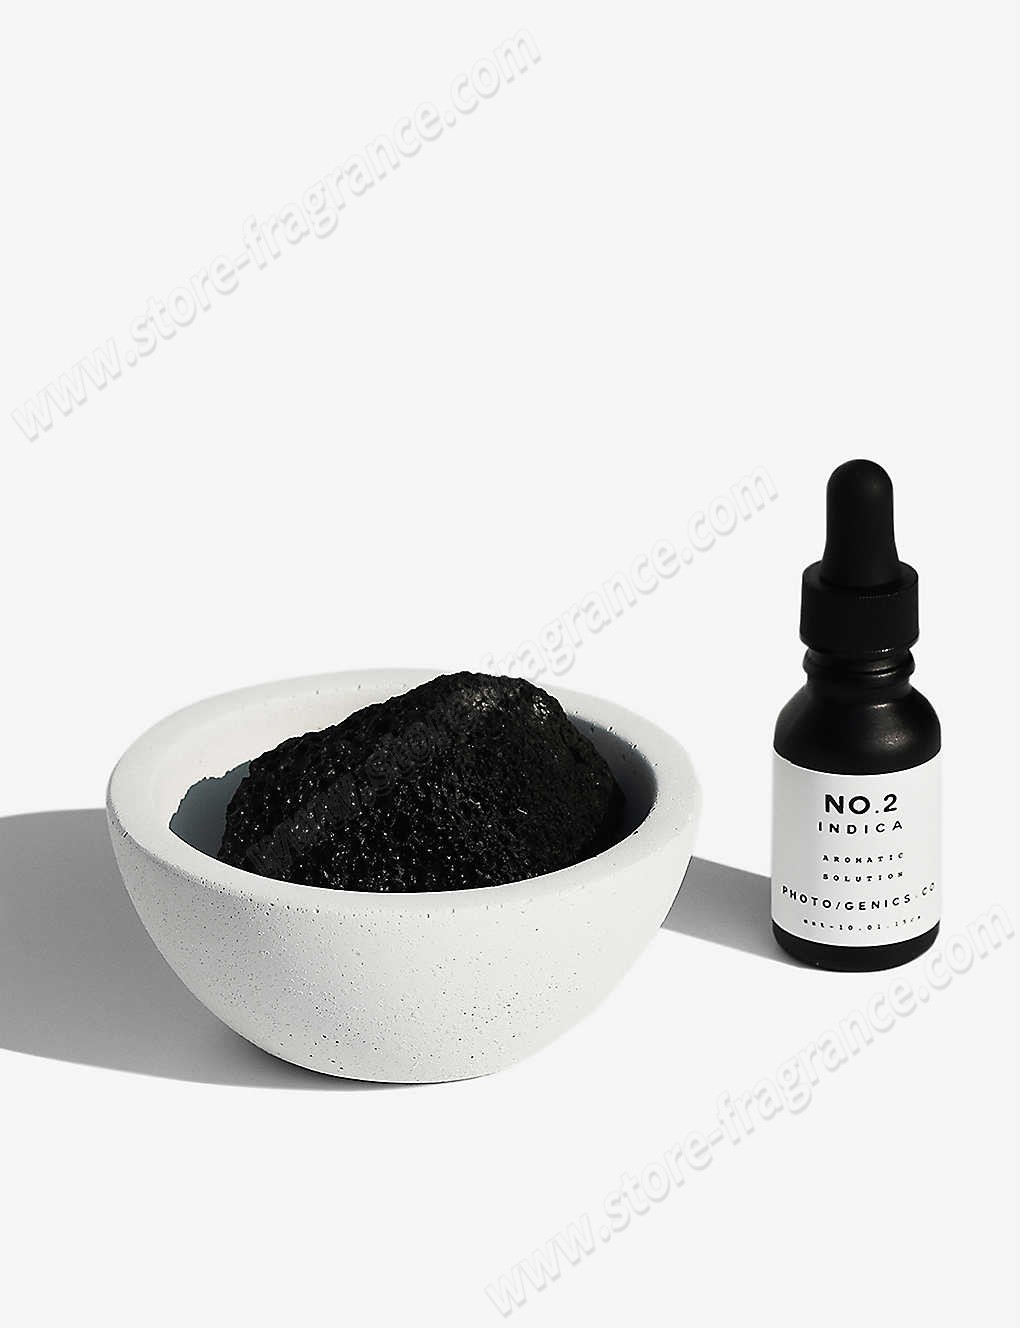 PHOTOGENICS & CO./No. 2 Indica aromatic solution with concrete bowl and lava rock .05oz Limit Offer - PHOTOGENICS & CO./No. 2 Indica aromatic solution with concrete bowl and lava rock .05oz Limit Offer